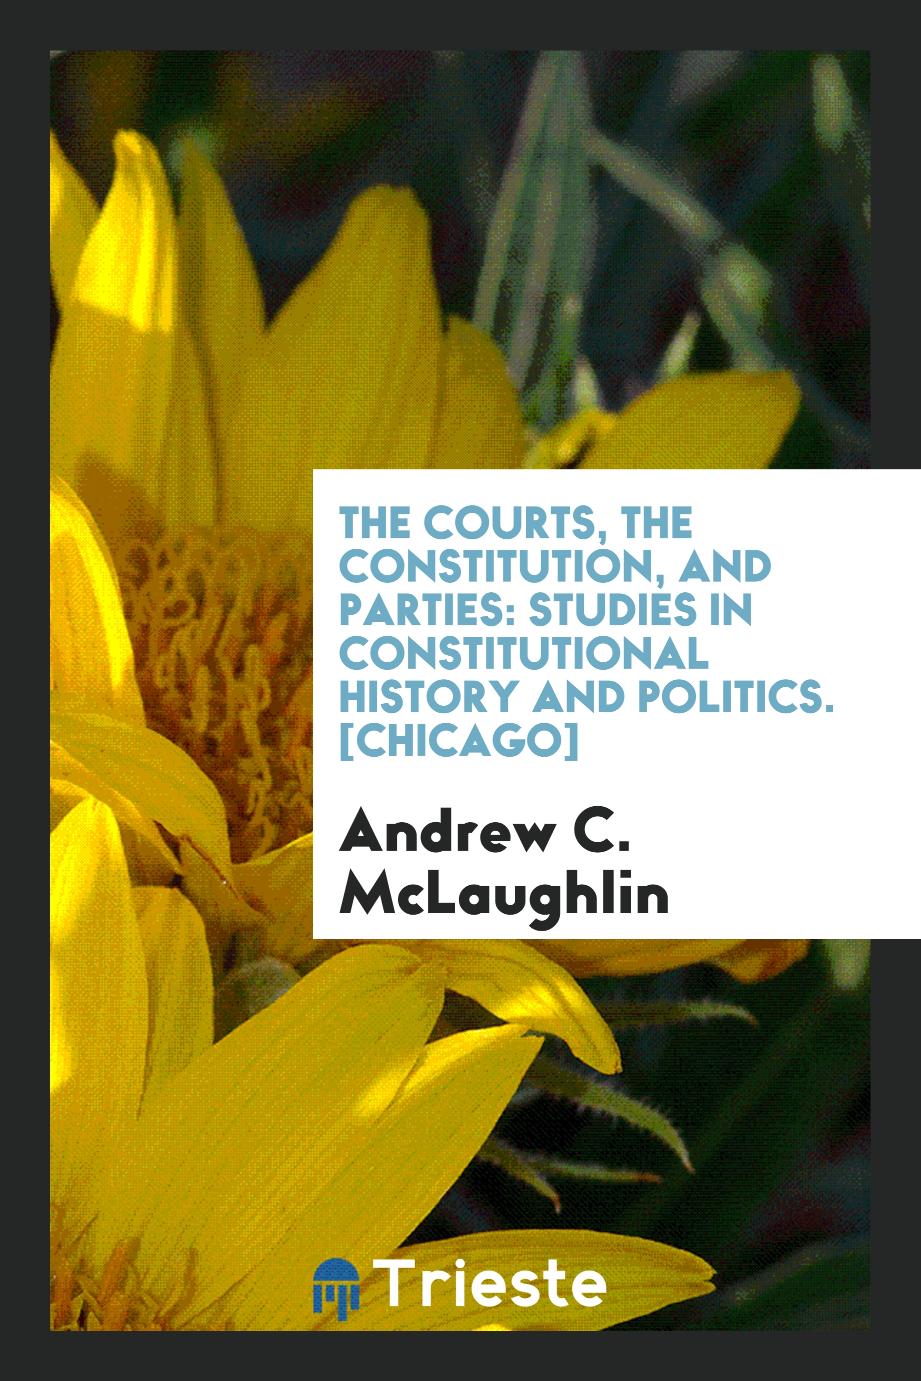 The Courts, the Constitution, and Parties: Studies in Constitutional History and Politics. [Chicago]